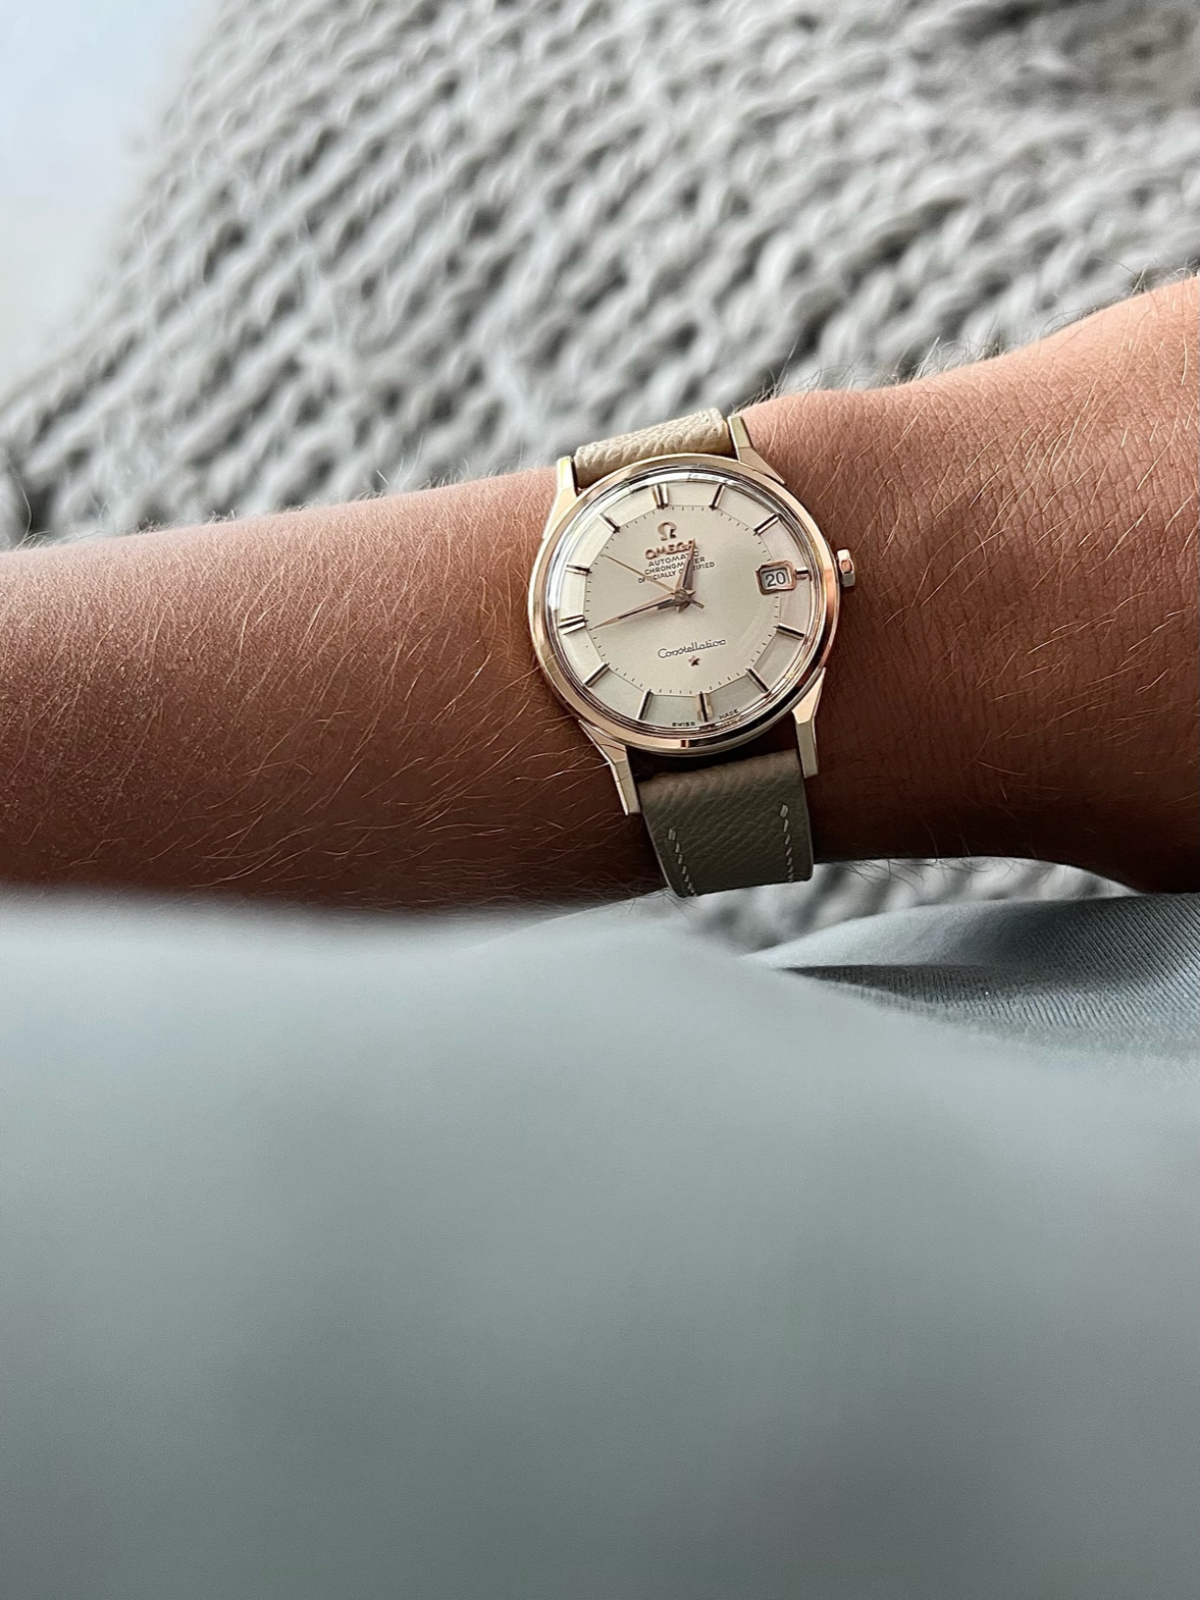 Owner review: Omega Constellation Pie Pan 168.005